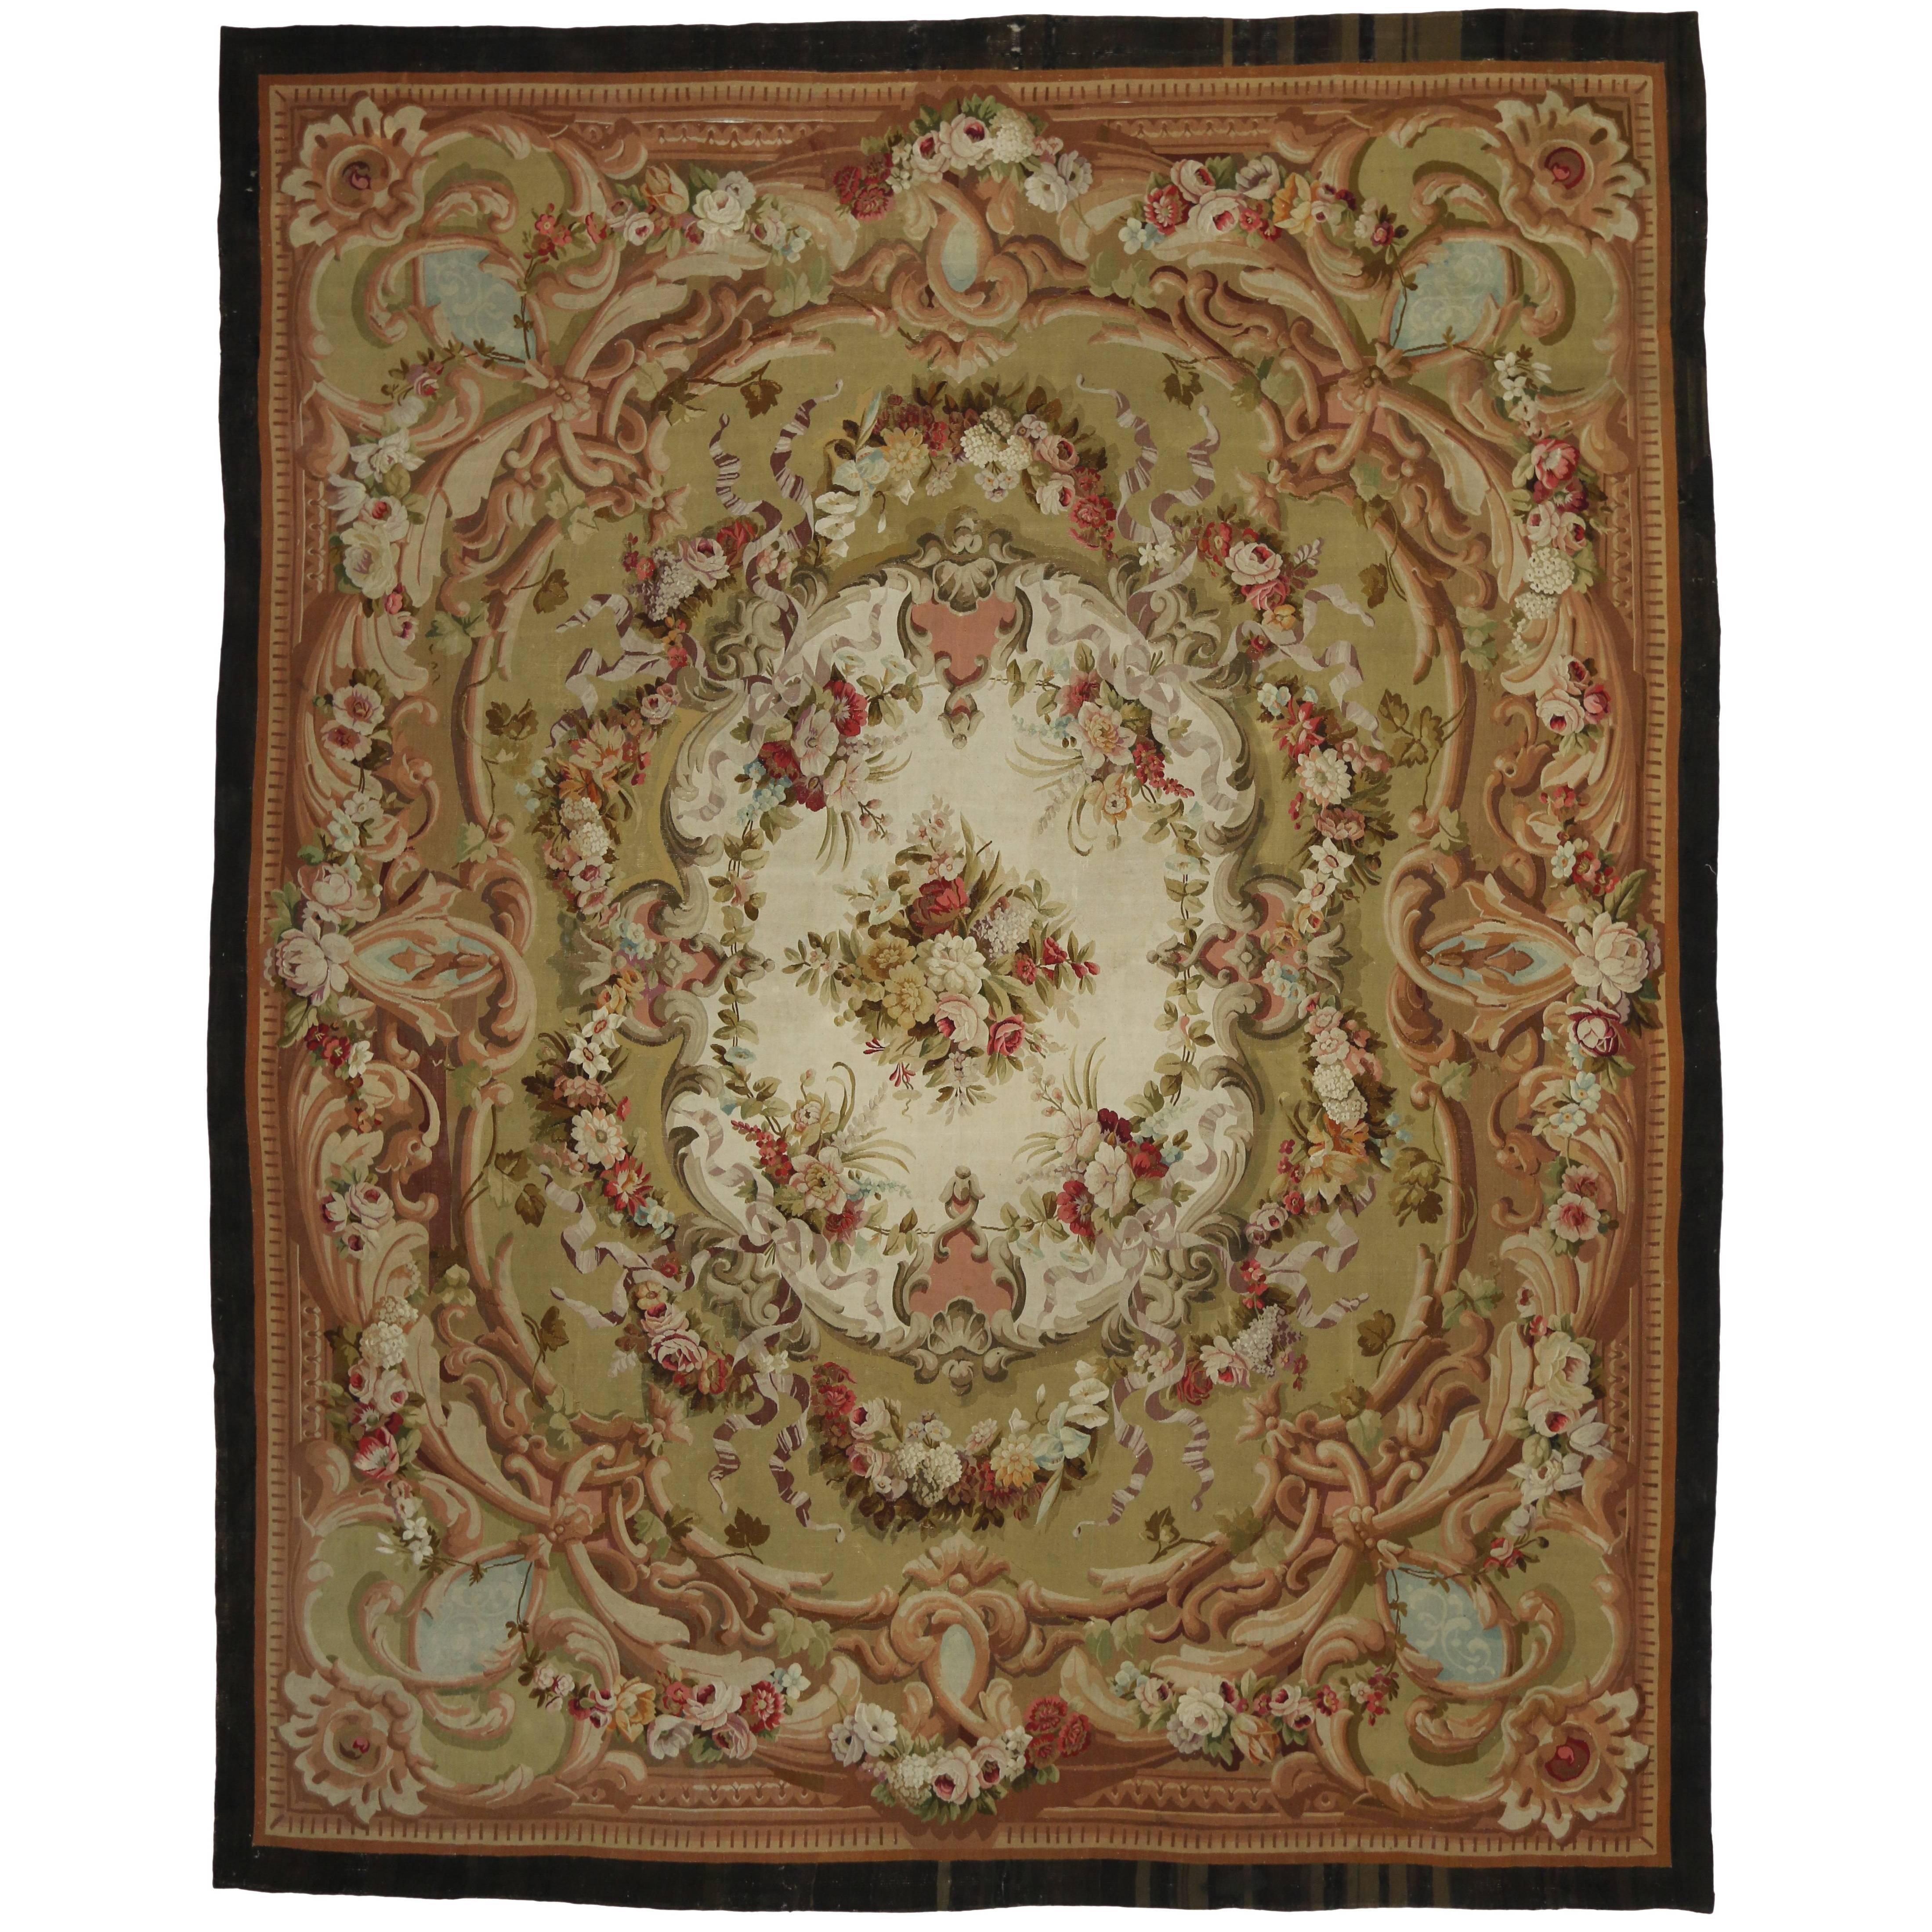 Antique French Aubusson Palace Size Rug with Rococo Louis XV Savonnerie Style